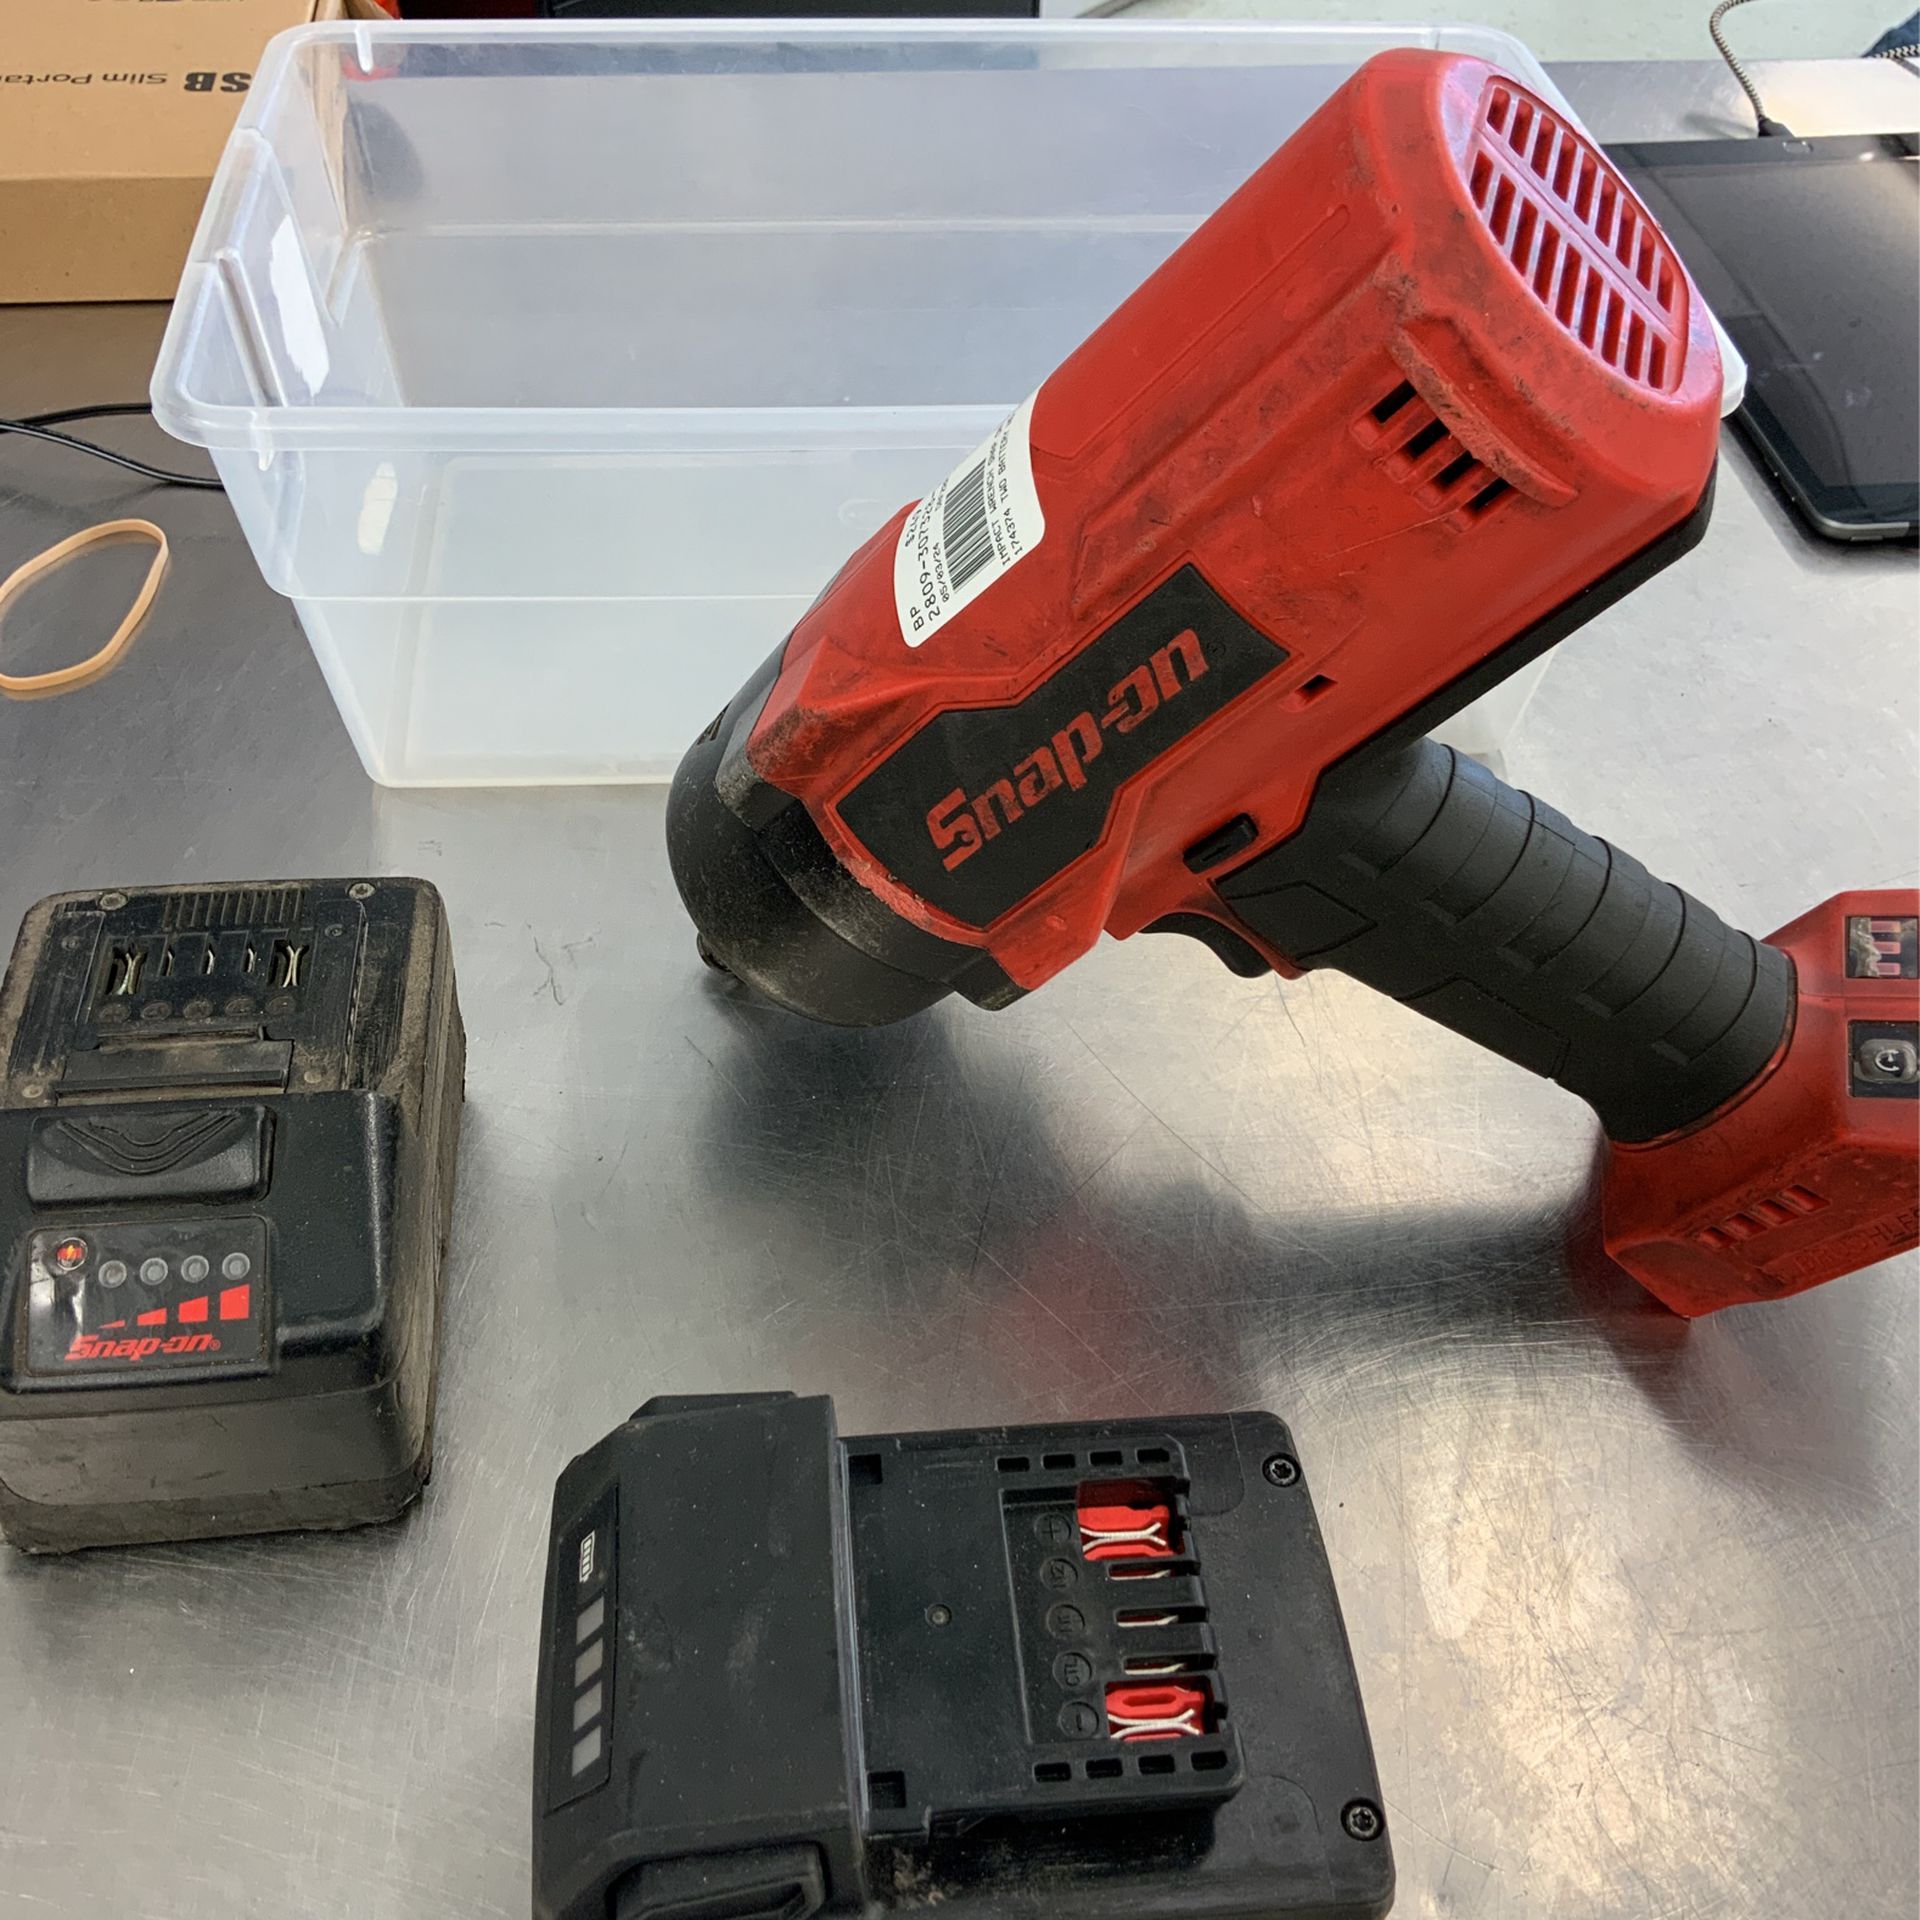 Snap On Impact Drill